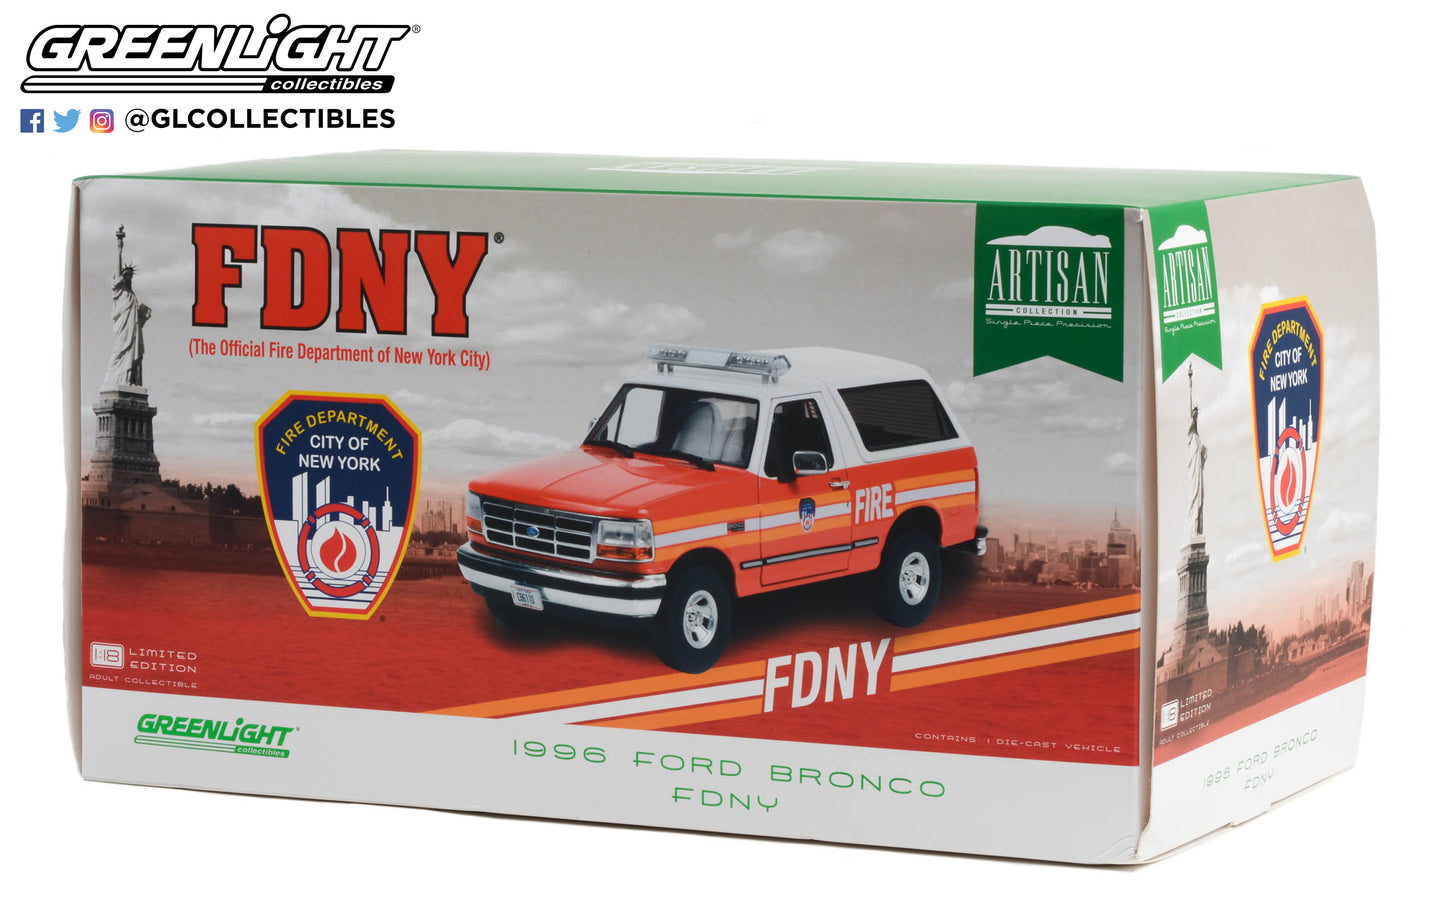 GreenLight 1:18 Artisan Collection - 1996 Ford Bronco - FDNY (The Official Fire Department City of New York) 19118